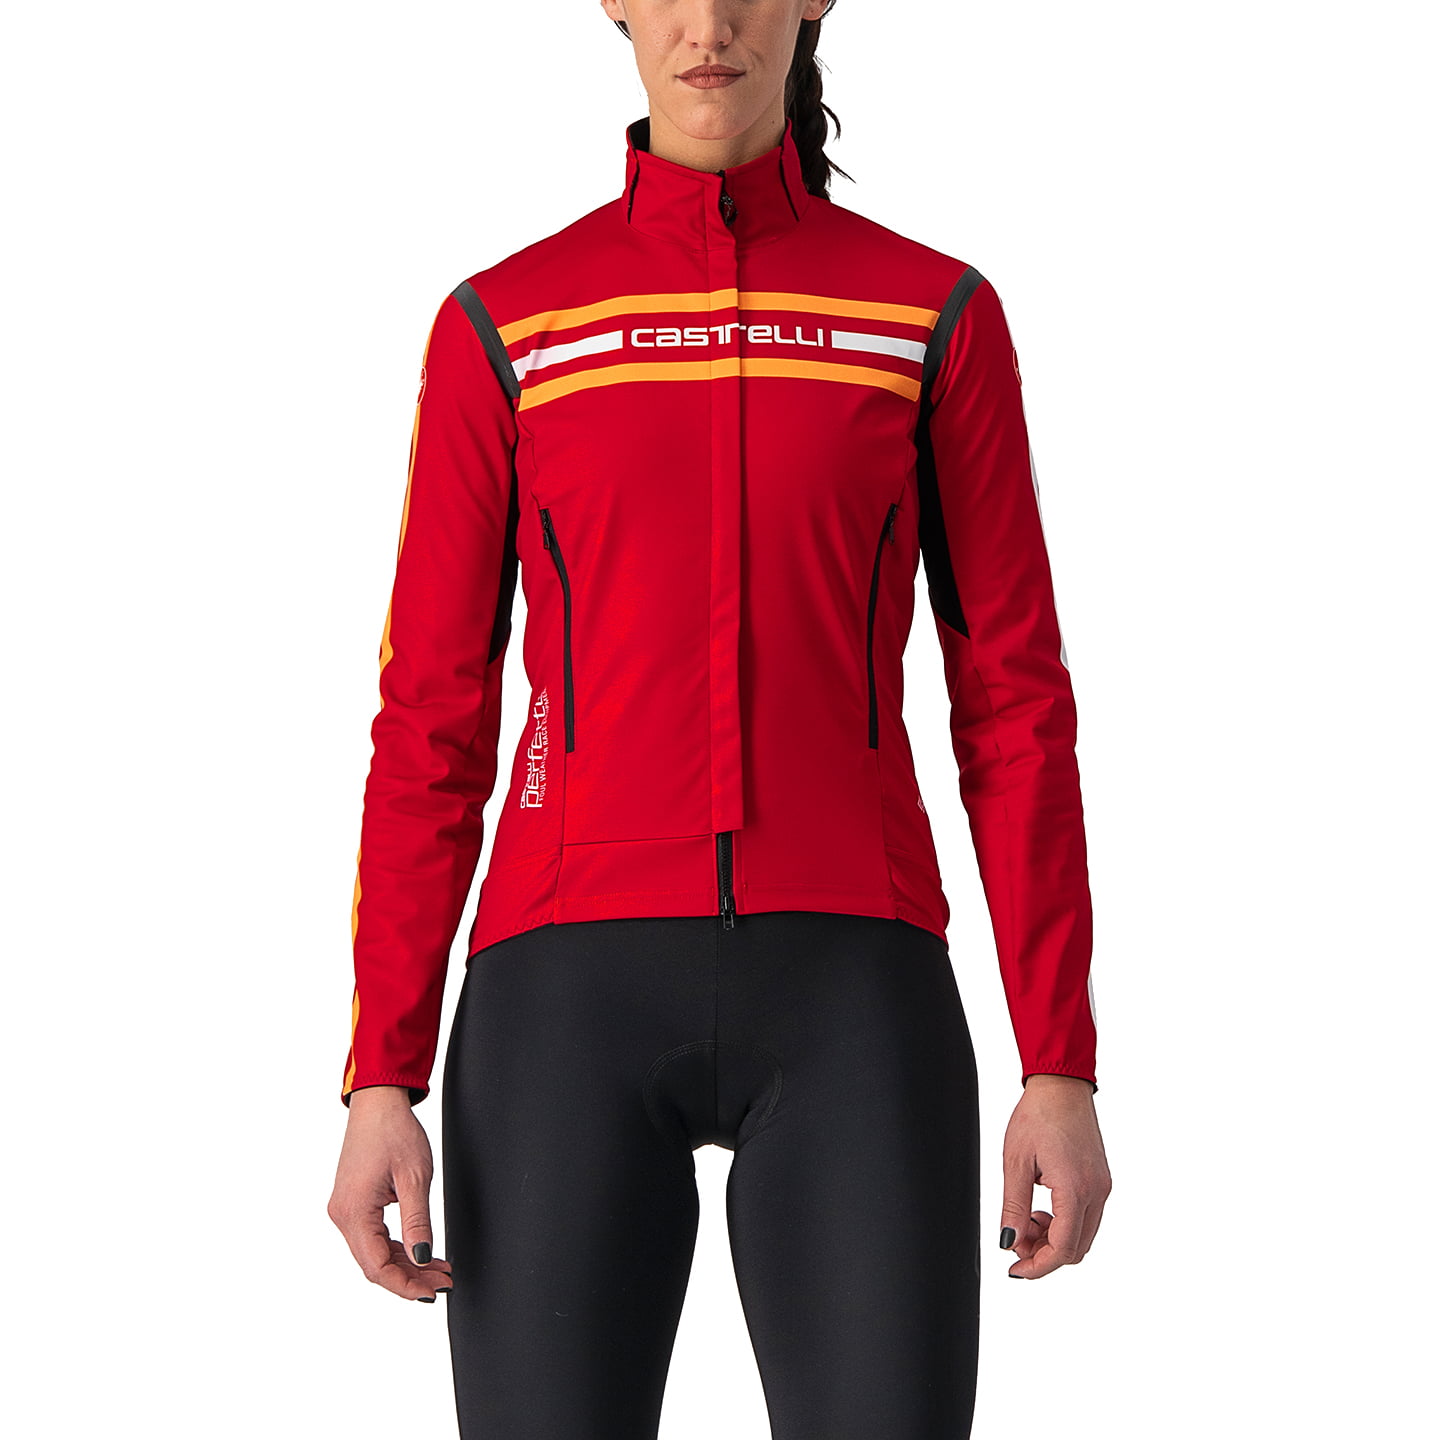 CASTELLI Perfetto RoS Unlimited Edt. Women’s Light Jacket Light Jacket, size L, Cycle jacket, Cycling clothing